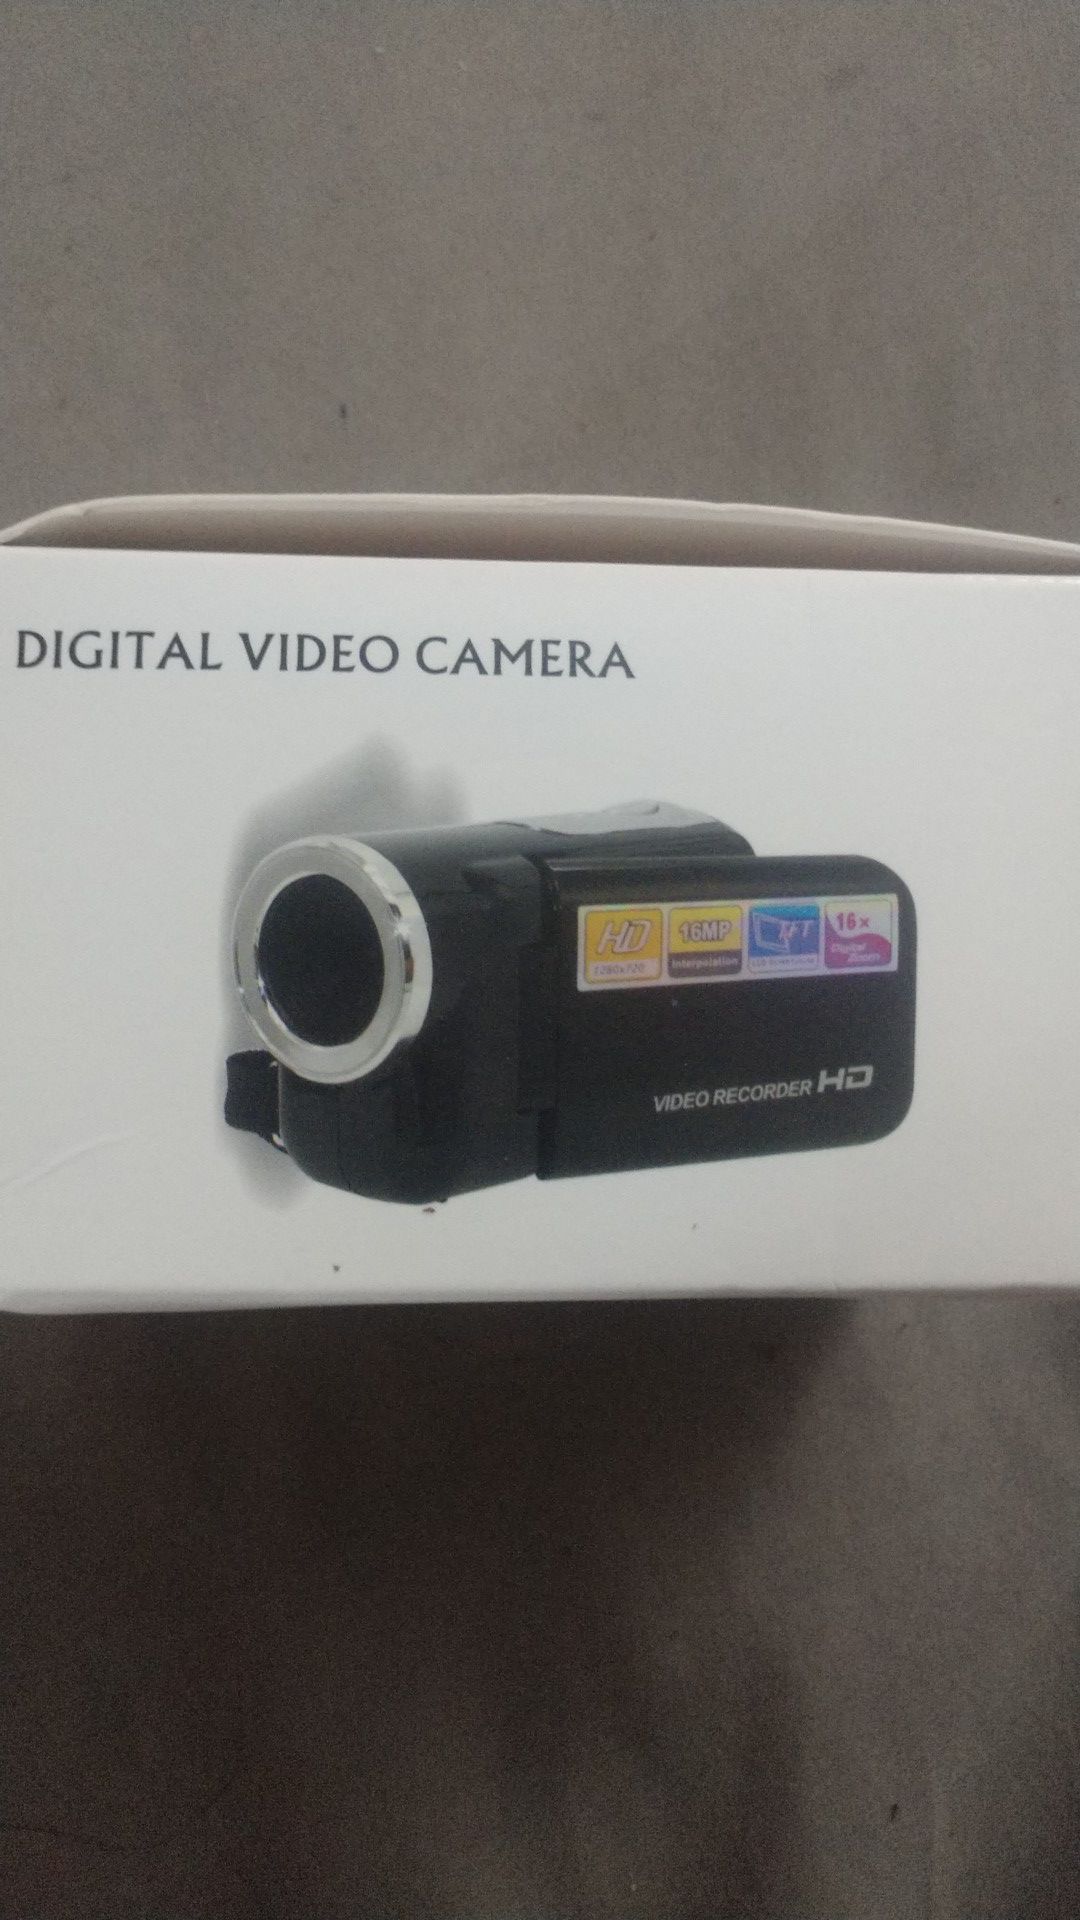 Mini HD digital camera, brand new in box never used, does need SD card to save video on